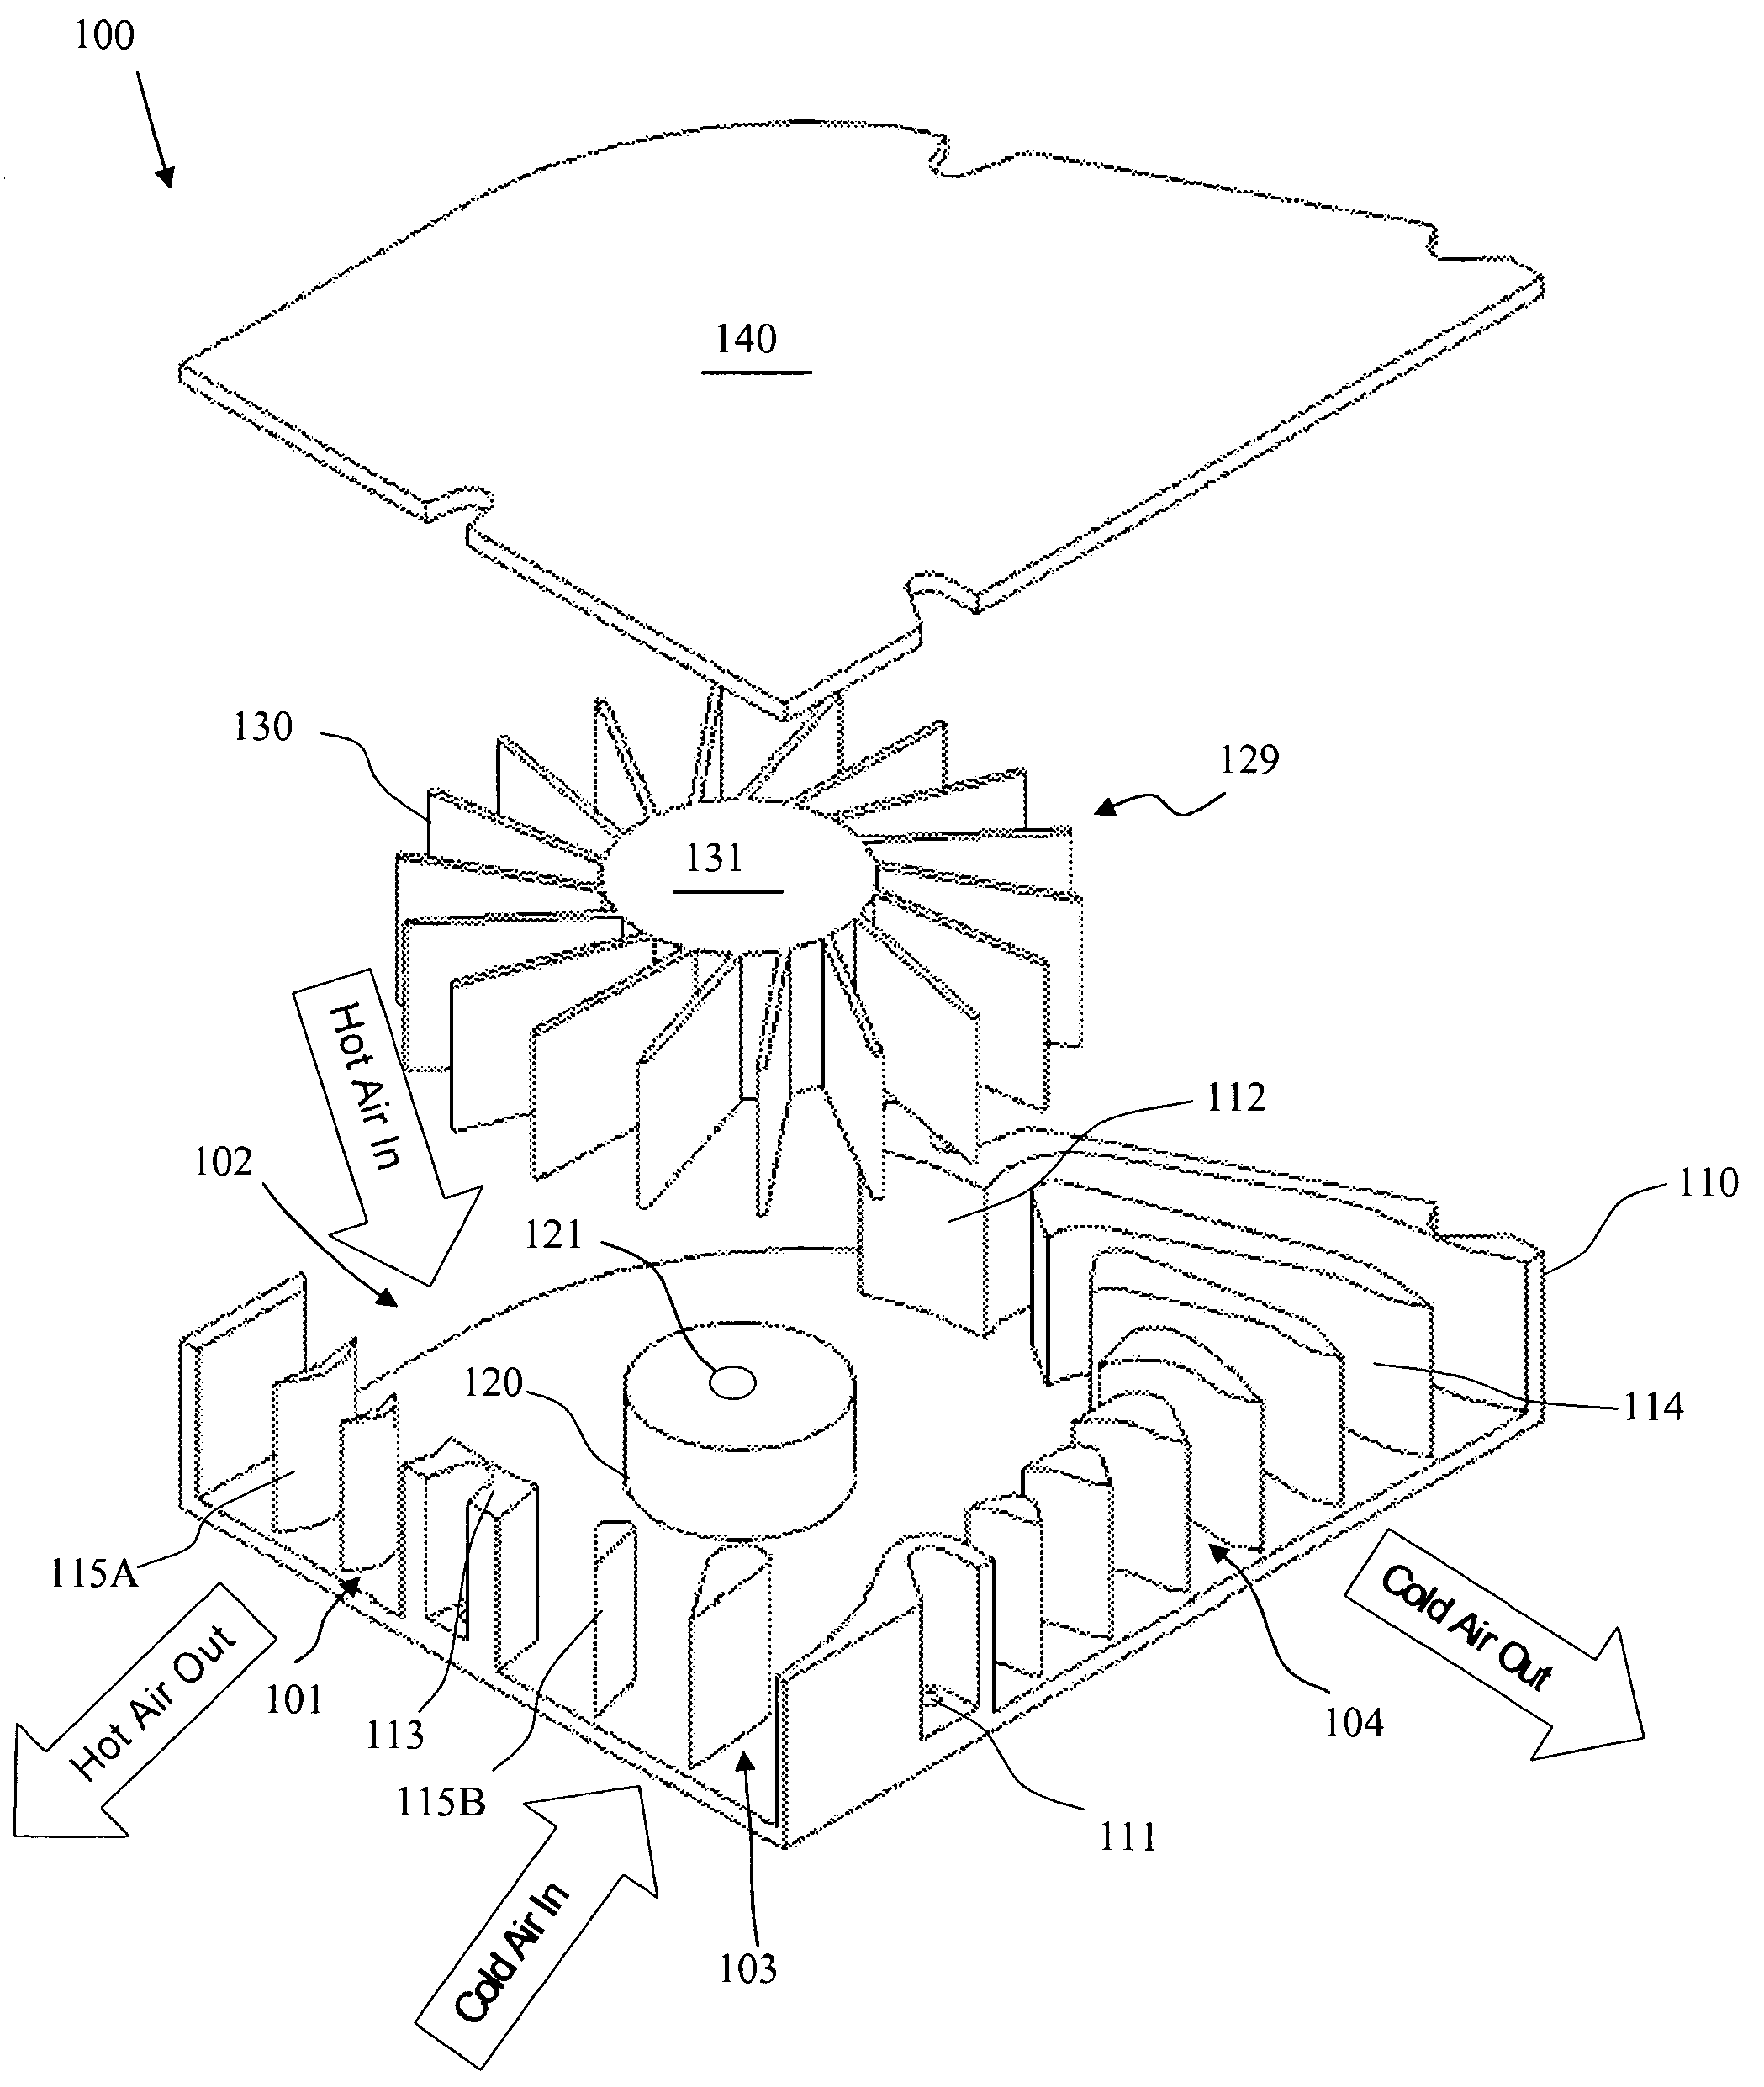 Bi-directional blowers for cooling computers